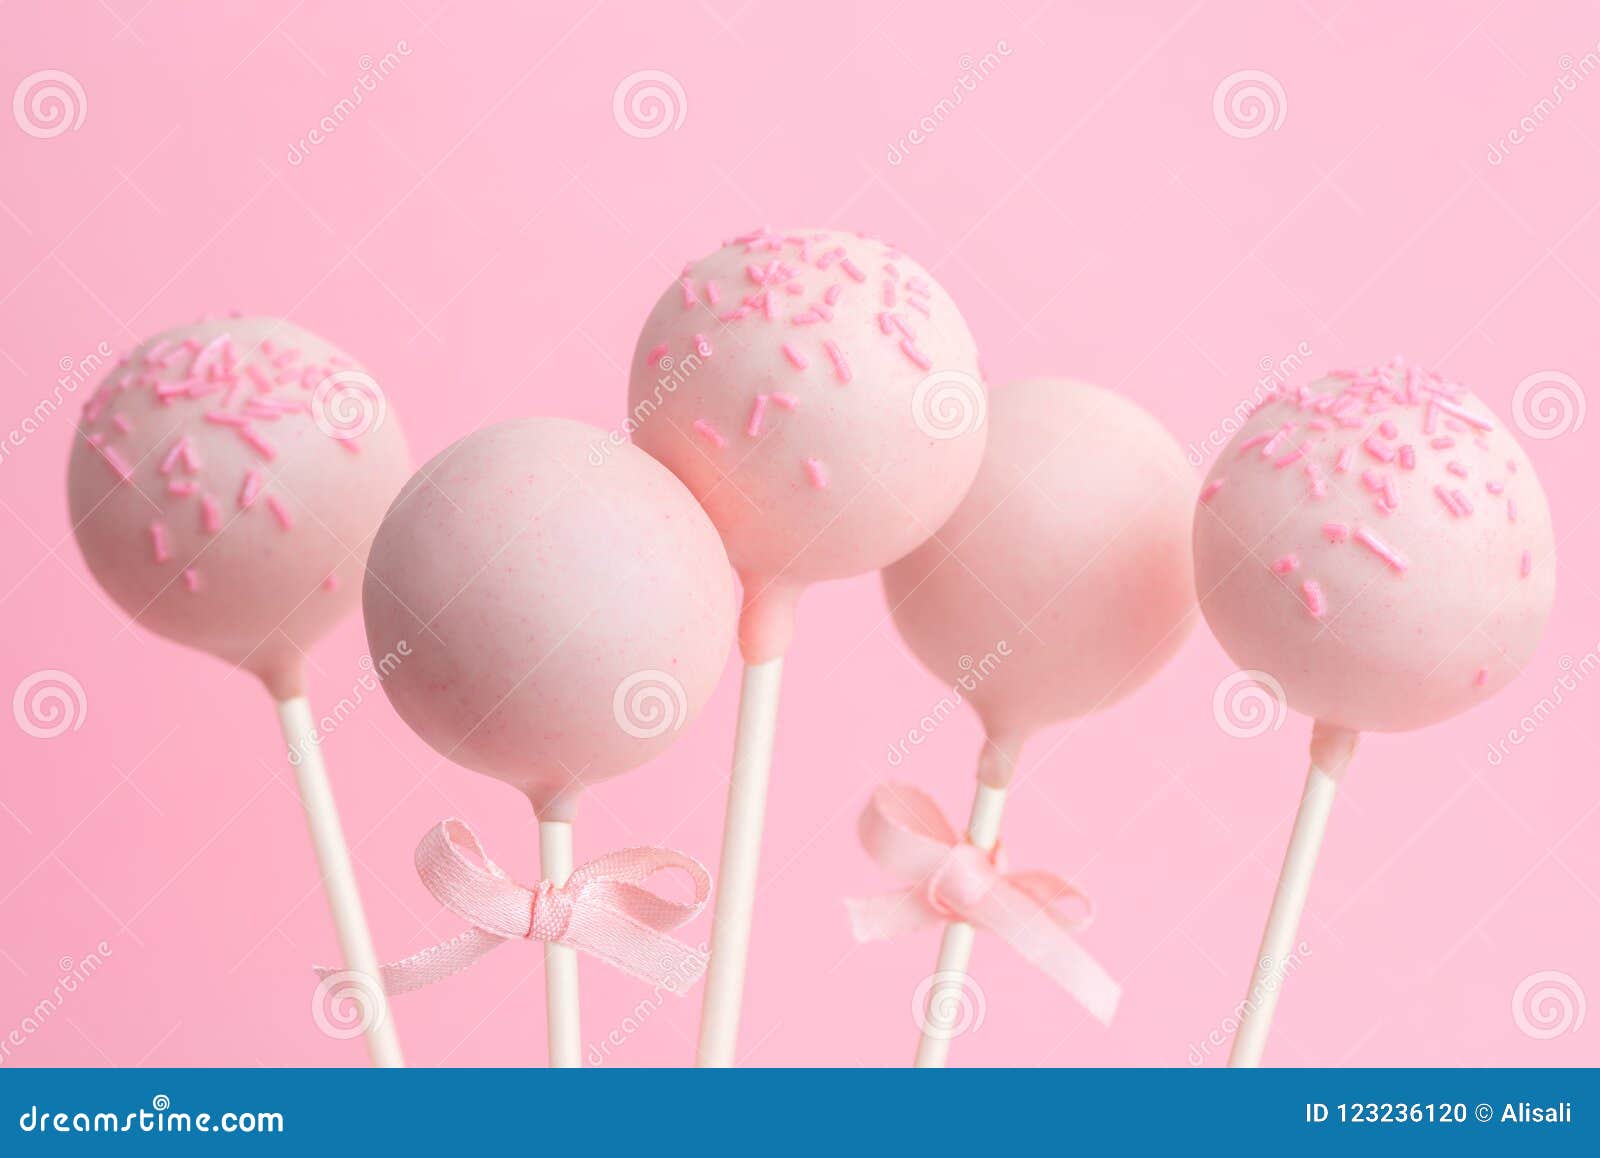 cake pops over pink background, concept of valentines day